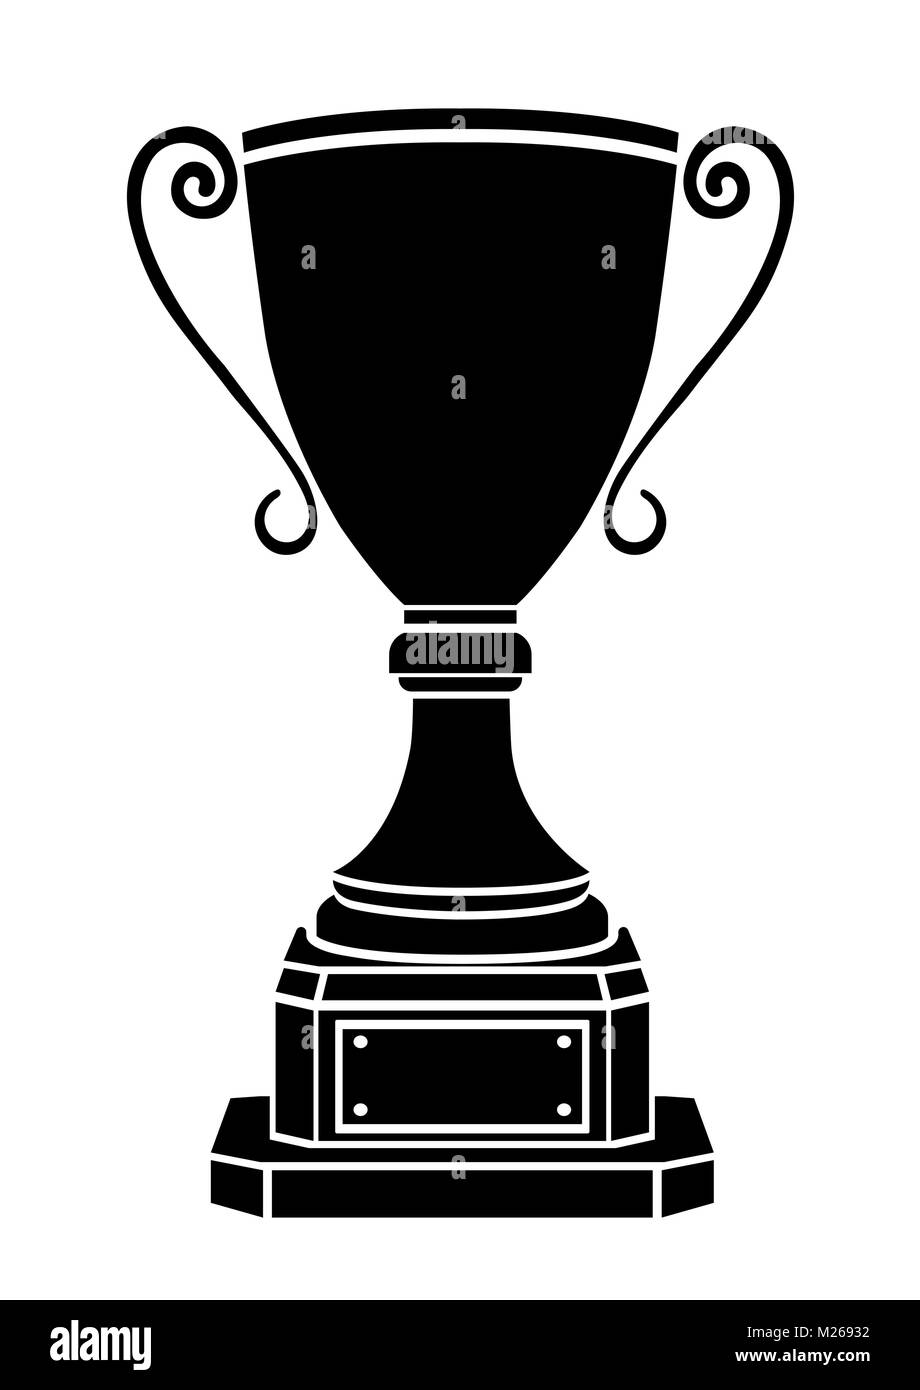 Cup winner vector icon, logo, sign, emblem, award nominal goblet, silhouette isolated on white background Stock Vector